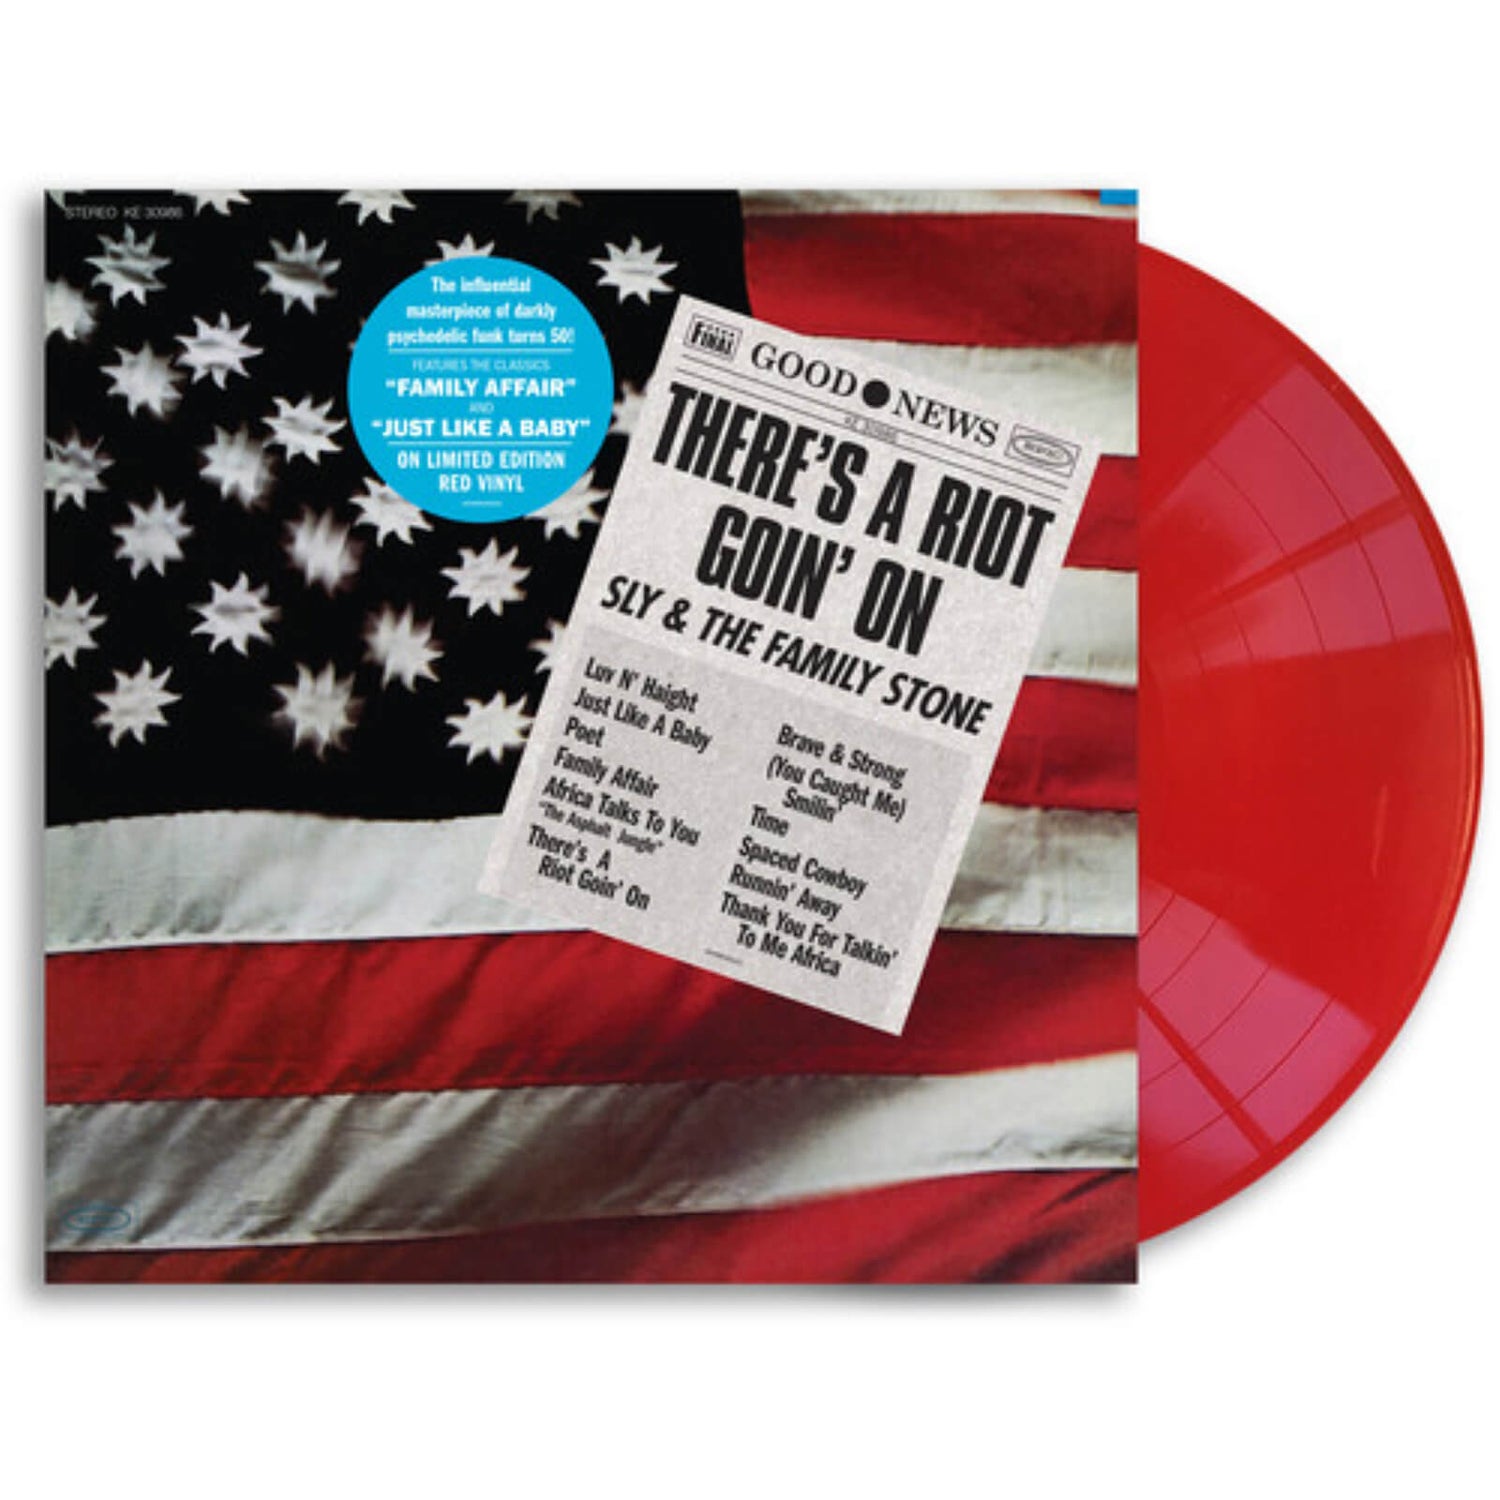 Sly & The Family Stone - There's A Riot Goin' On Vinyl (Red)